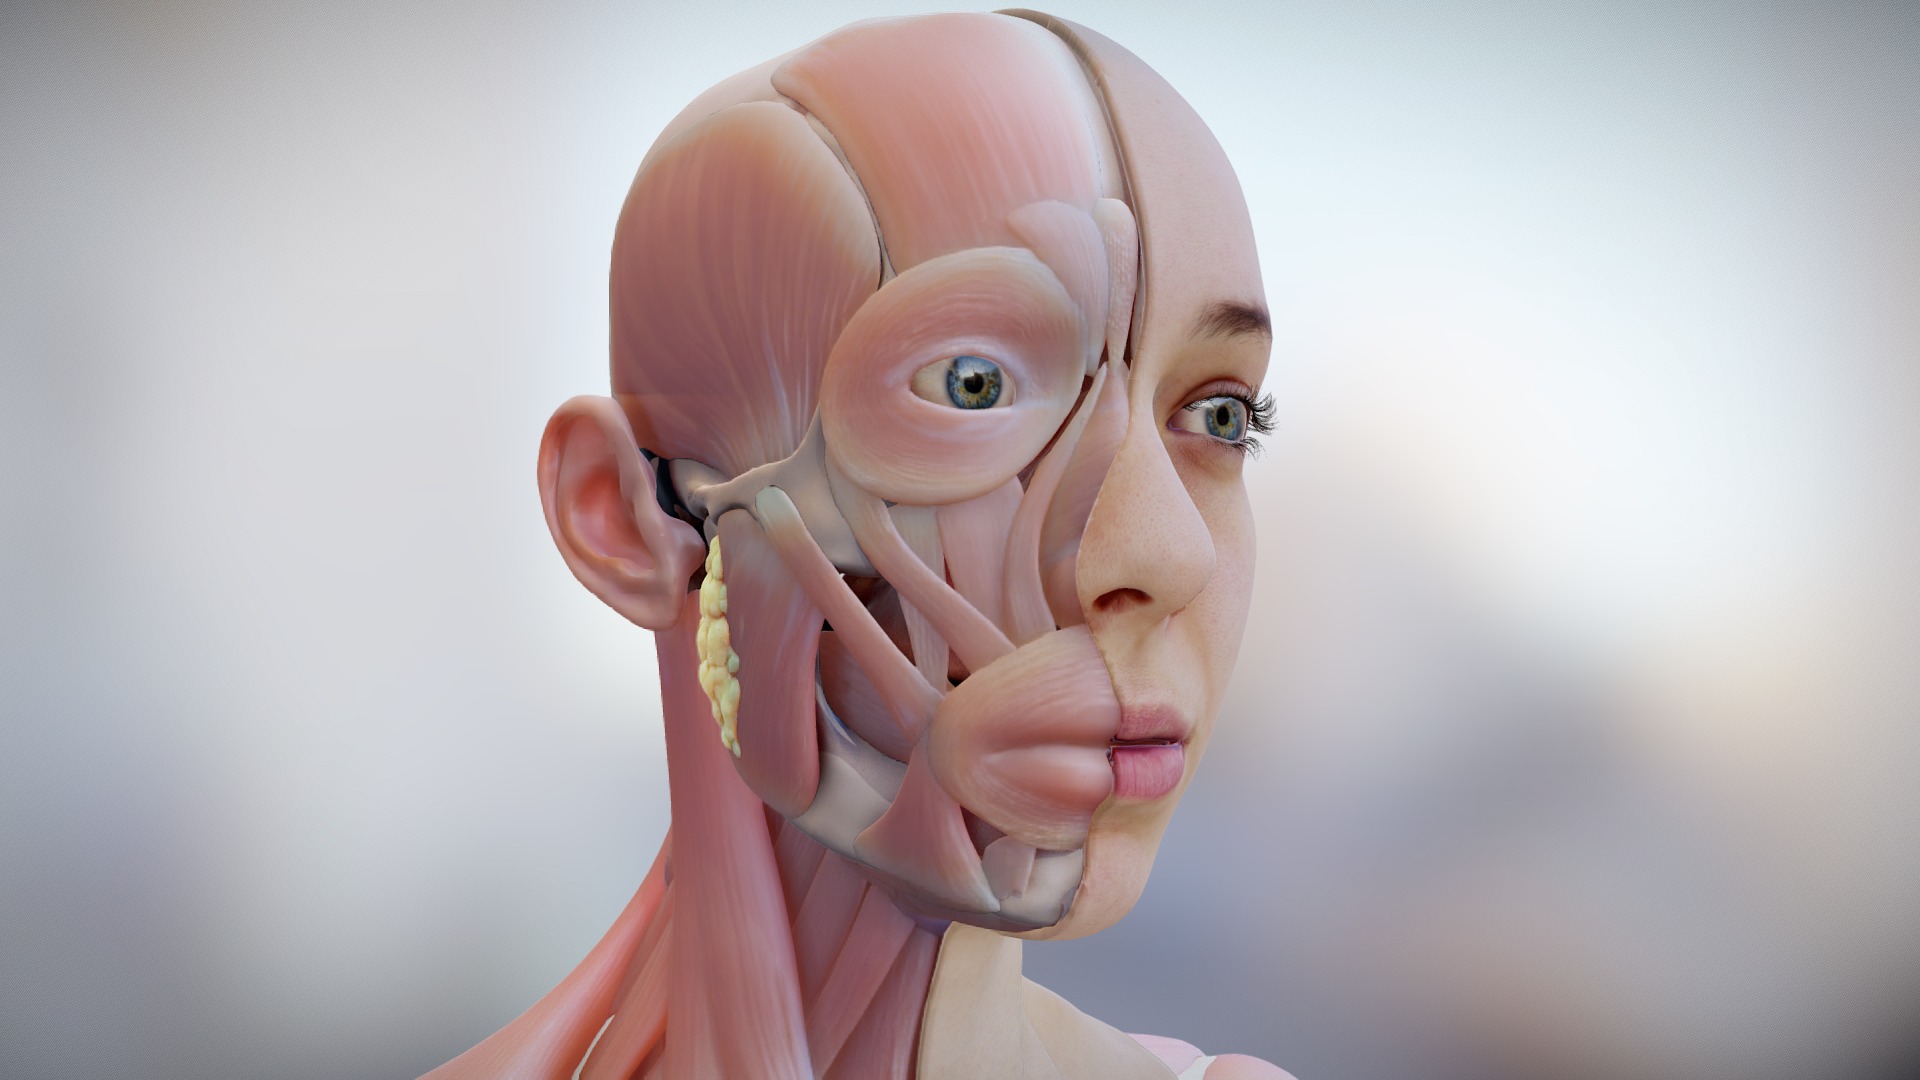 Anatomy of the head and neck of the human body, focusing on the muscles and their function 3d model